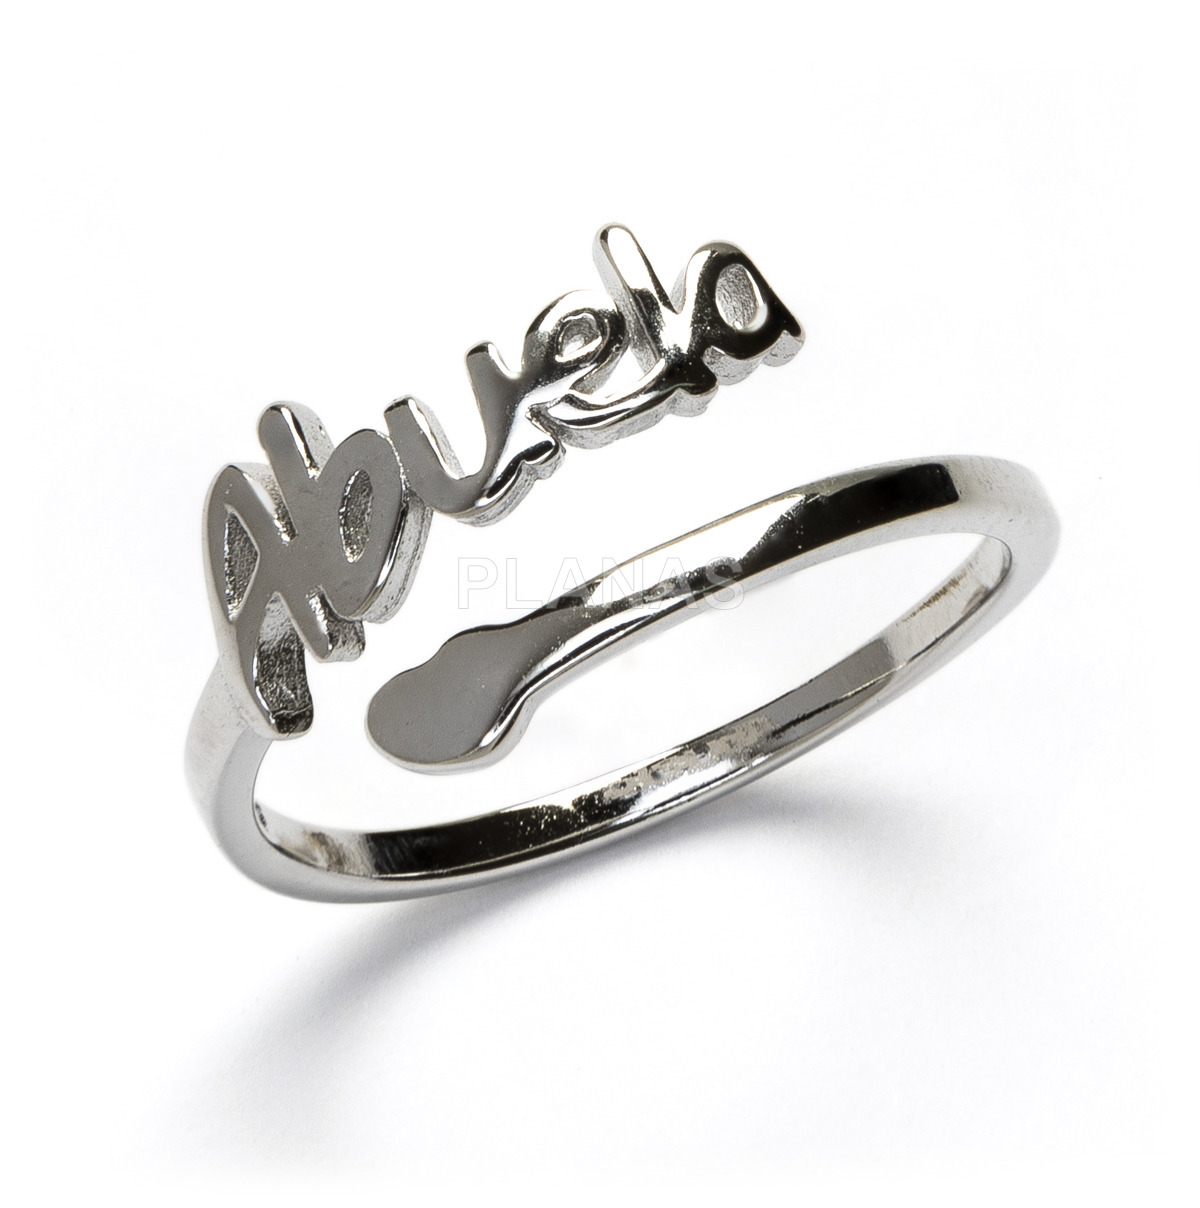 Rhodium plated sterling silver ring. grandmother.